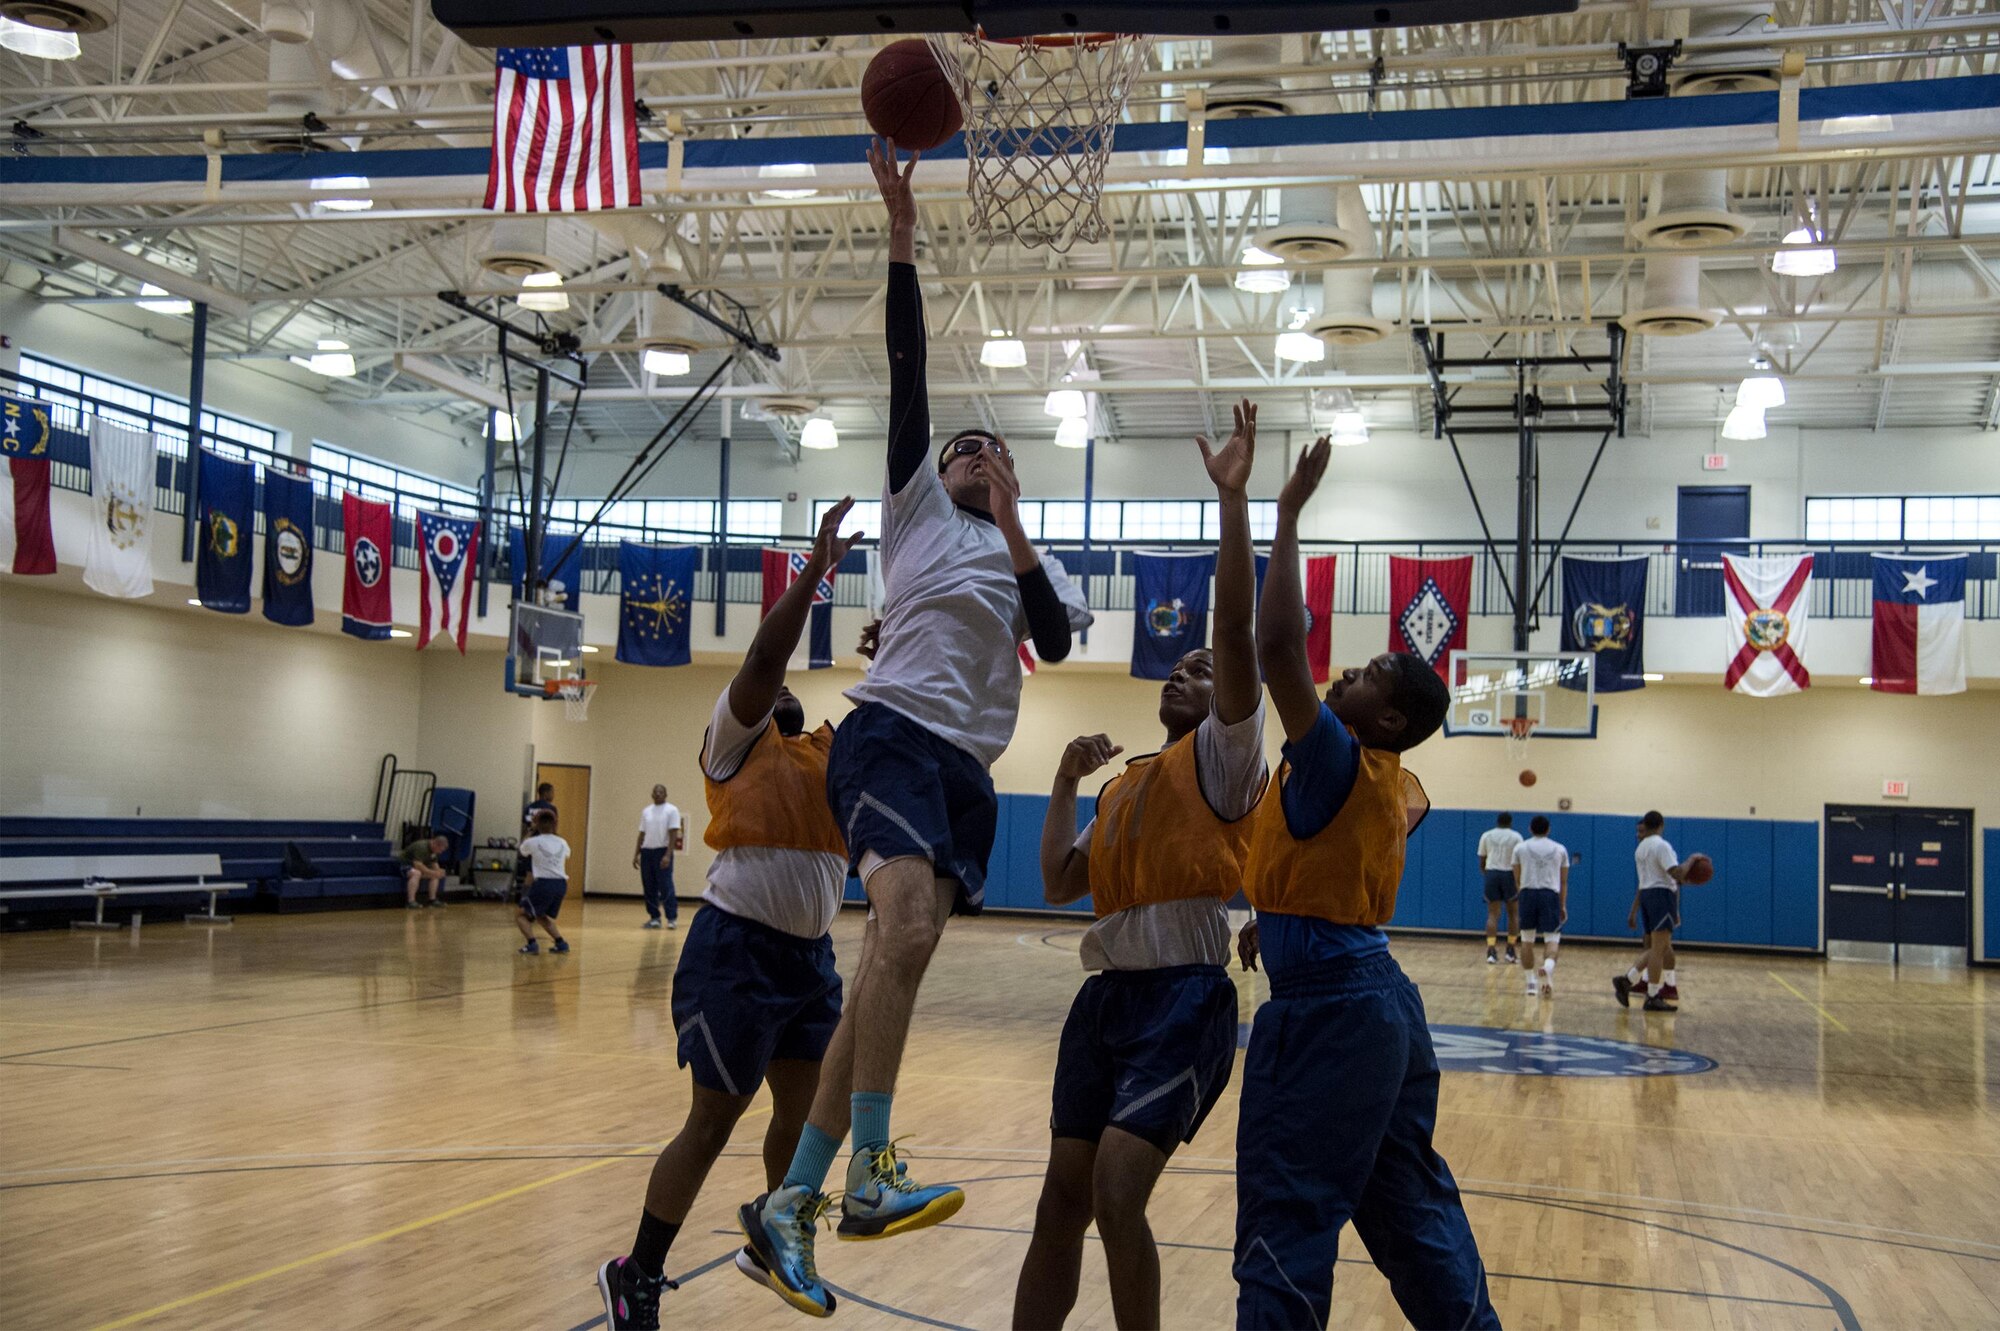 U.S. Air Force Airman Ricardo Garcia, 23d Force Support Squadron fitness apprentice, jumps for a lay-up during Sports Day, June 17, 2016, at Moody Air Force Base, Ga. The 23d Mission Support Group put together teams from each of its squadrons to go head-to-head in a 3-on-3 basketball tournament. (U.S. Air Force photo by Airman 1st Class Janiqua P. Robinson/Released)